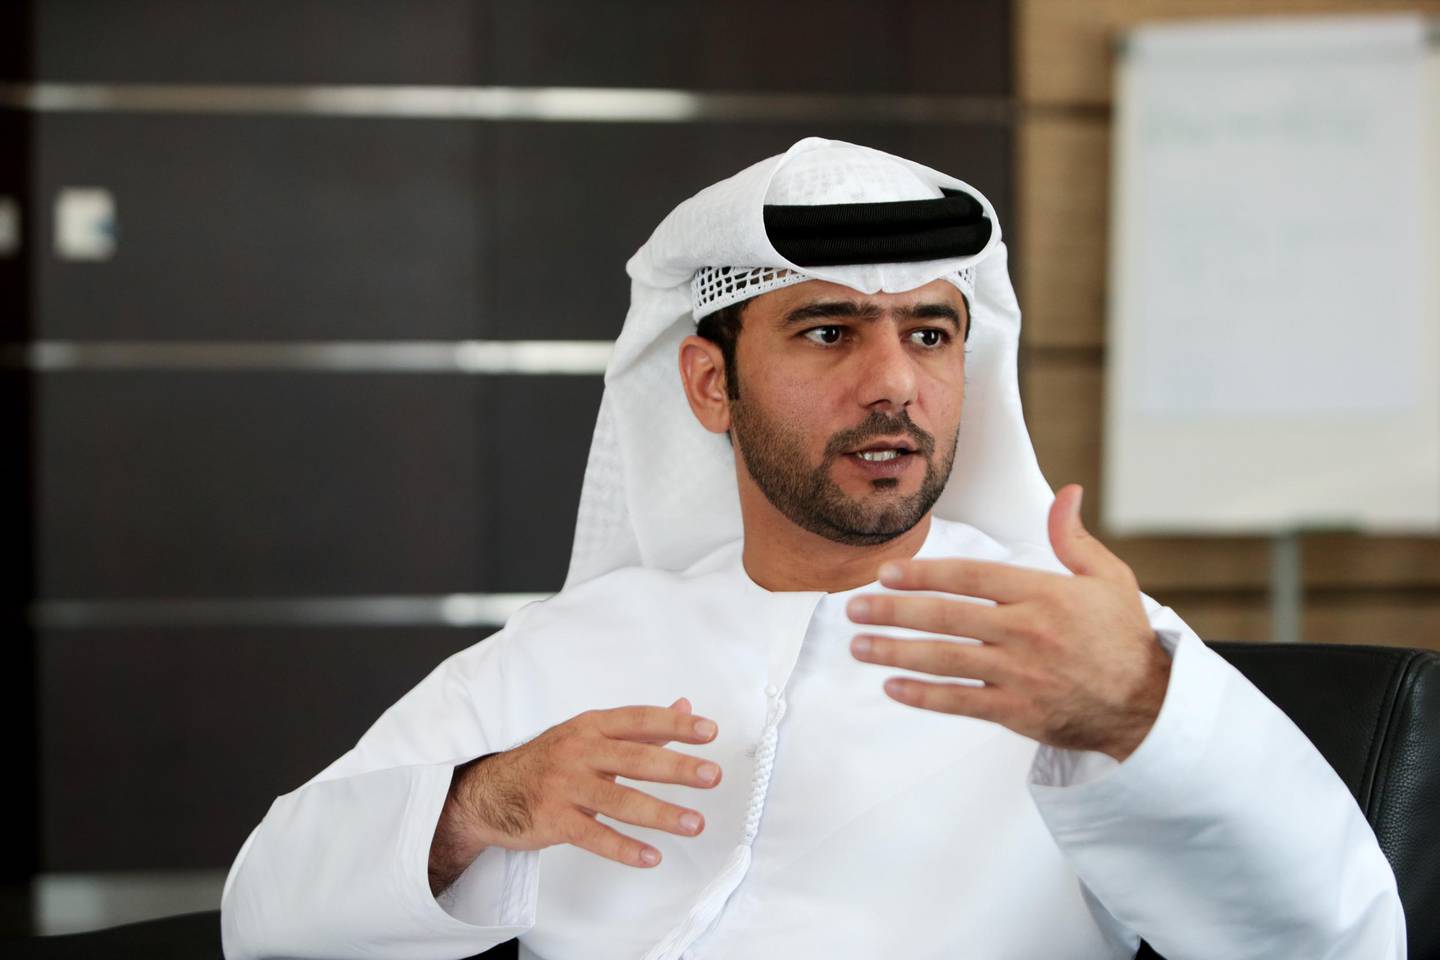 Abu Dhabi, United Arab Emirates, May 12, 2014:     Captain Mohamed Juma Al Shamisi Abu Dhabi Port Company chief executive speaks during an interview in his office at the ADPC in Abu Dhabi on May 12, 2014. Christopher Pike / The National

Reporter: Iyer Srinivasan
Section: Business




